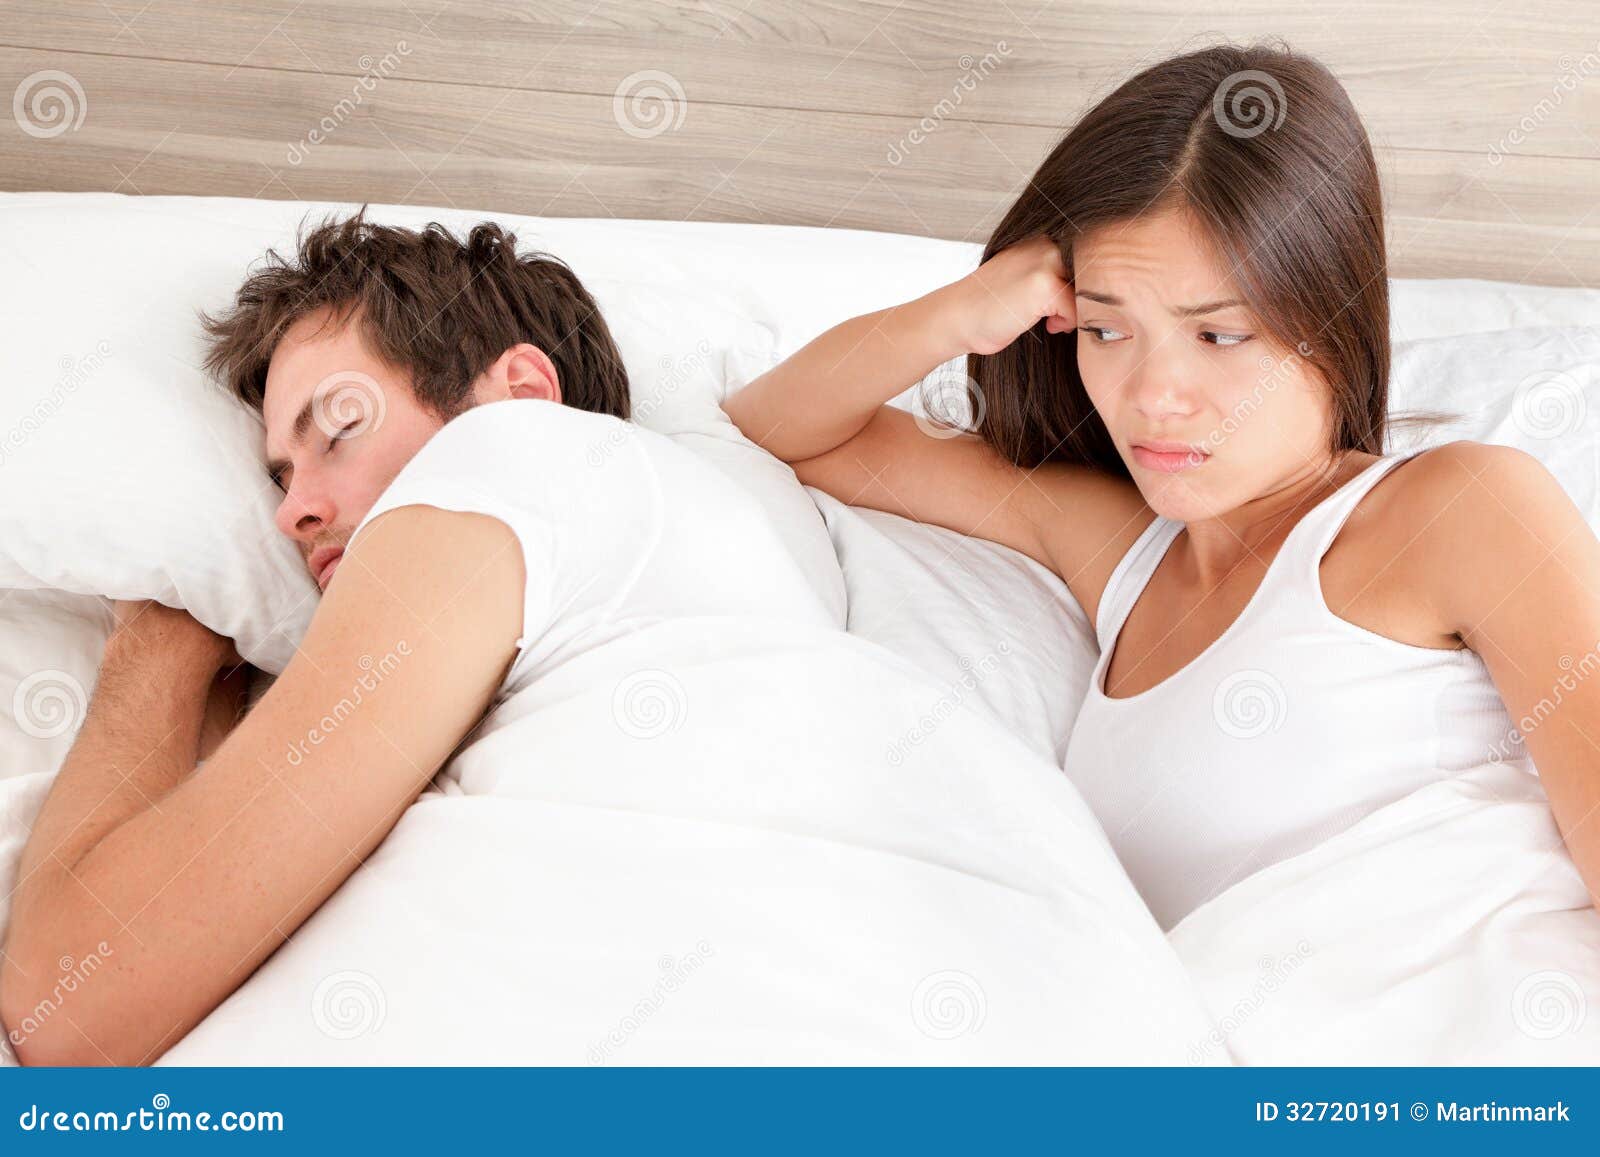 Marriage Couple Marital Problems in Bed Stock Image